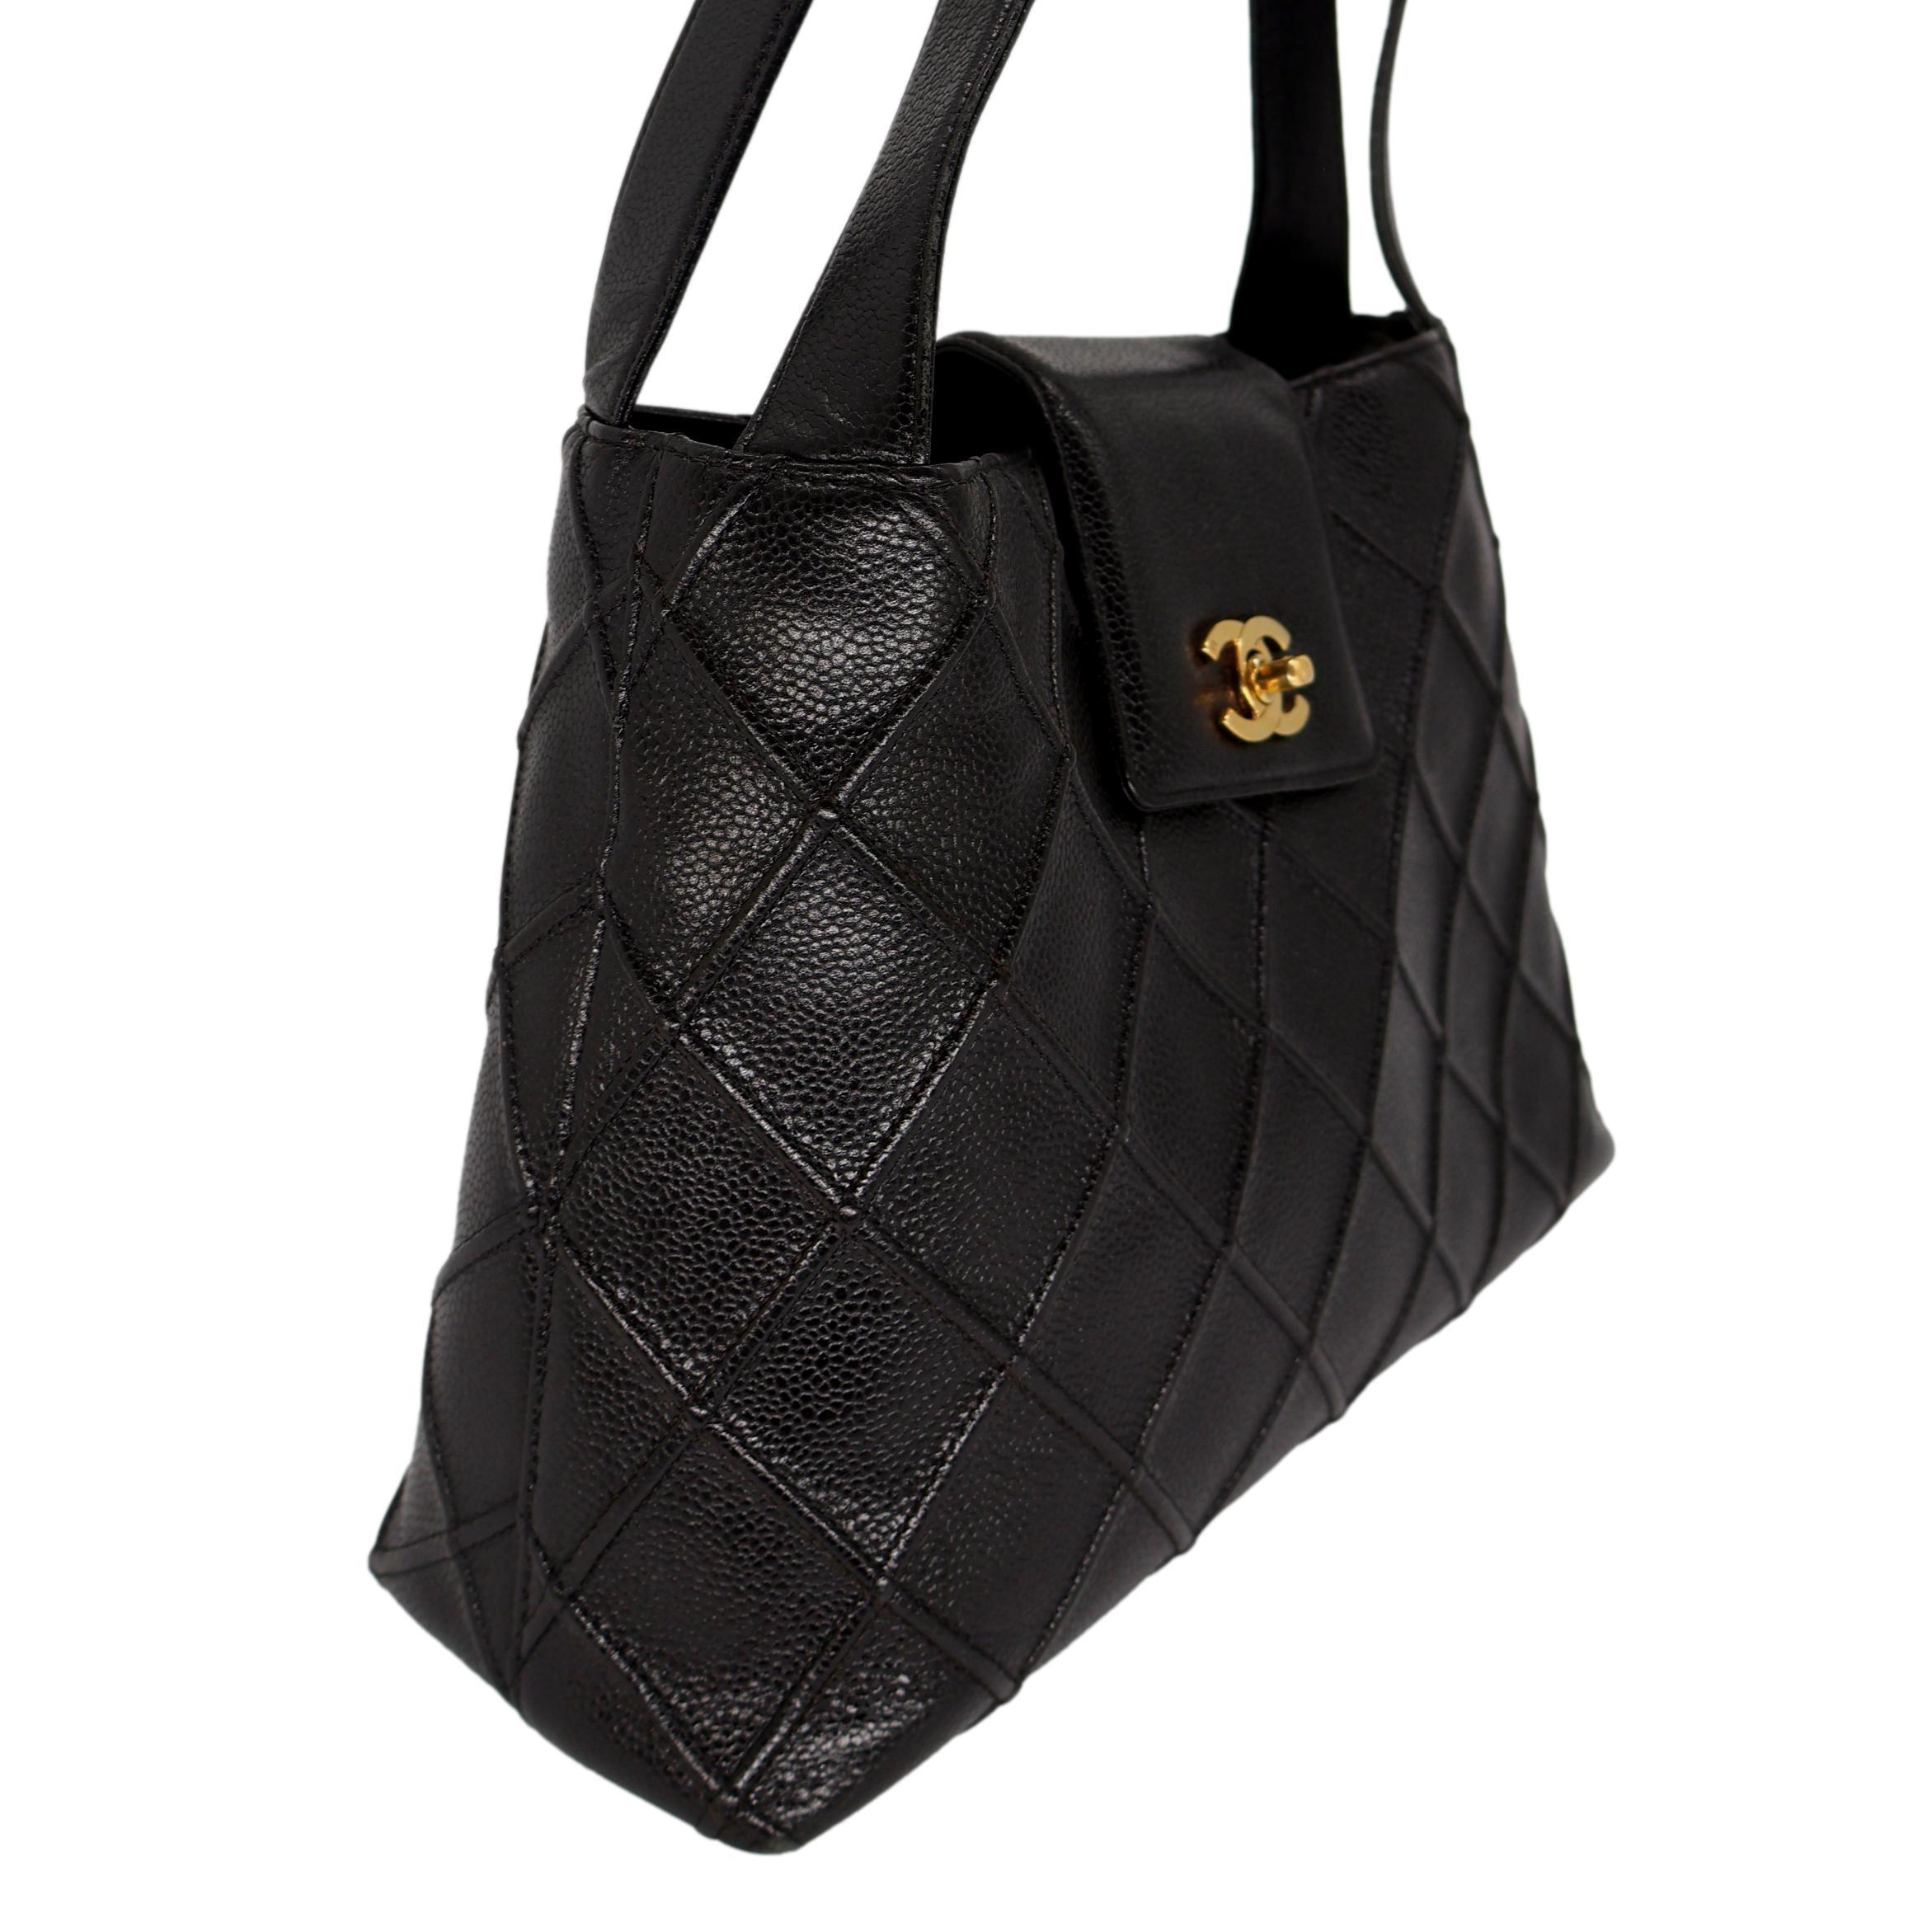 Chanel Vintage Black Reverse Quilted Caviar Leather Shoulder Bag with 24KT Hardware, 1996 - 1997. Crafted from the classic and Chanel's most durable black caviar leather, this Chanel quilted shoulder bag features a double 10